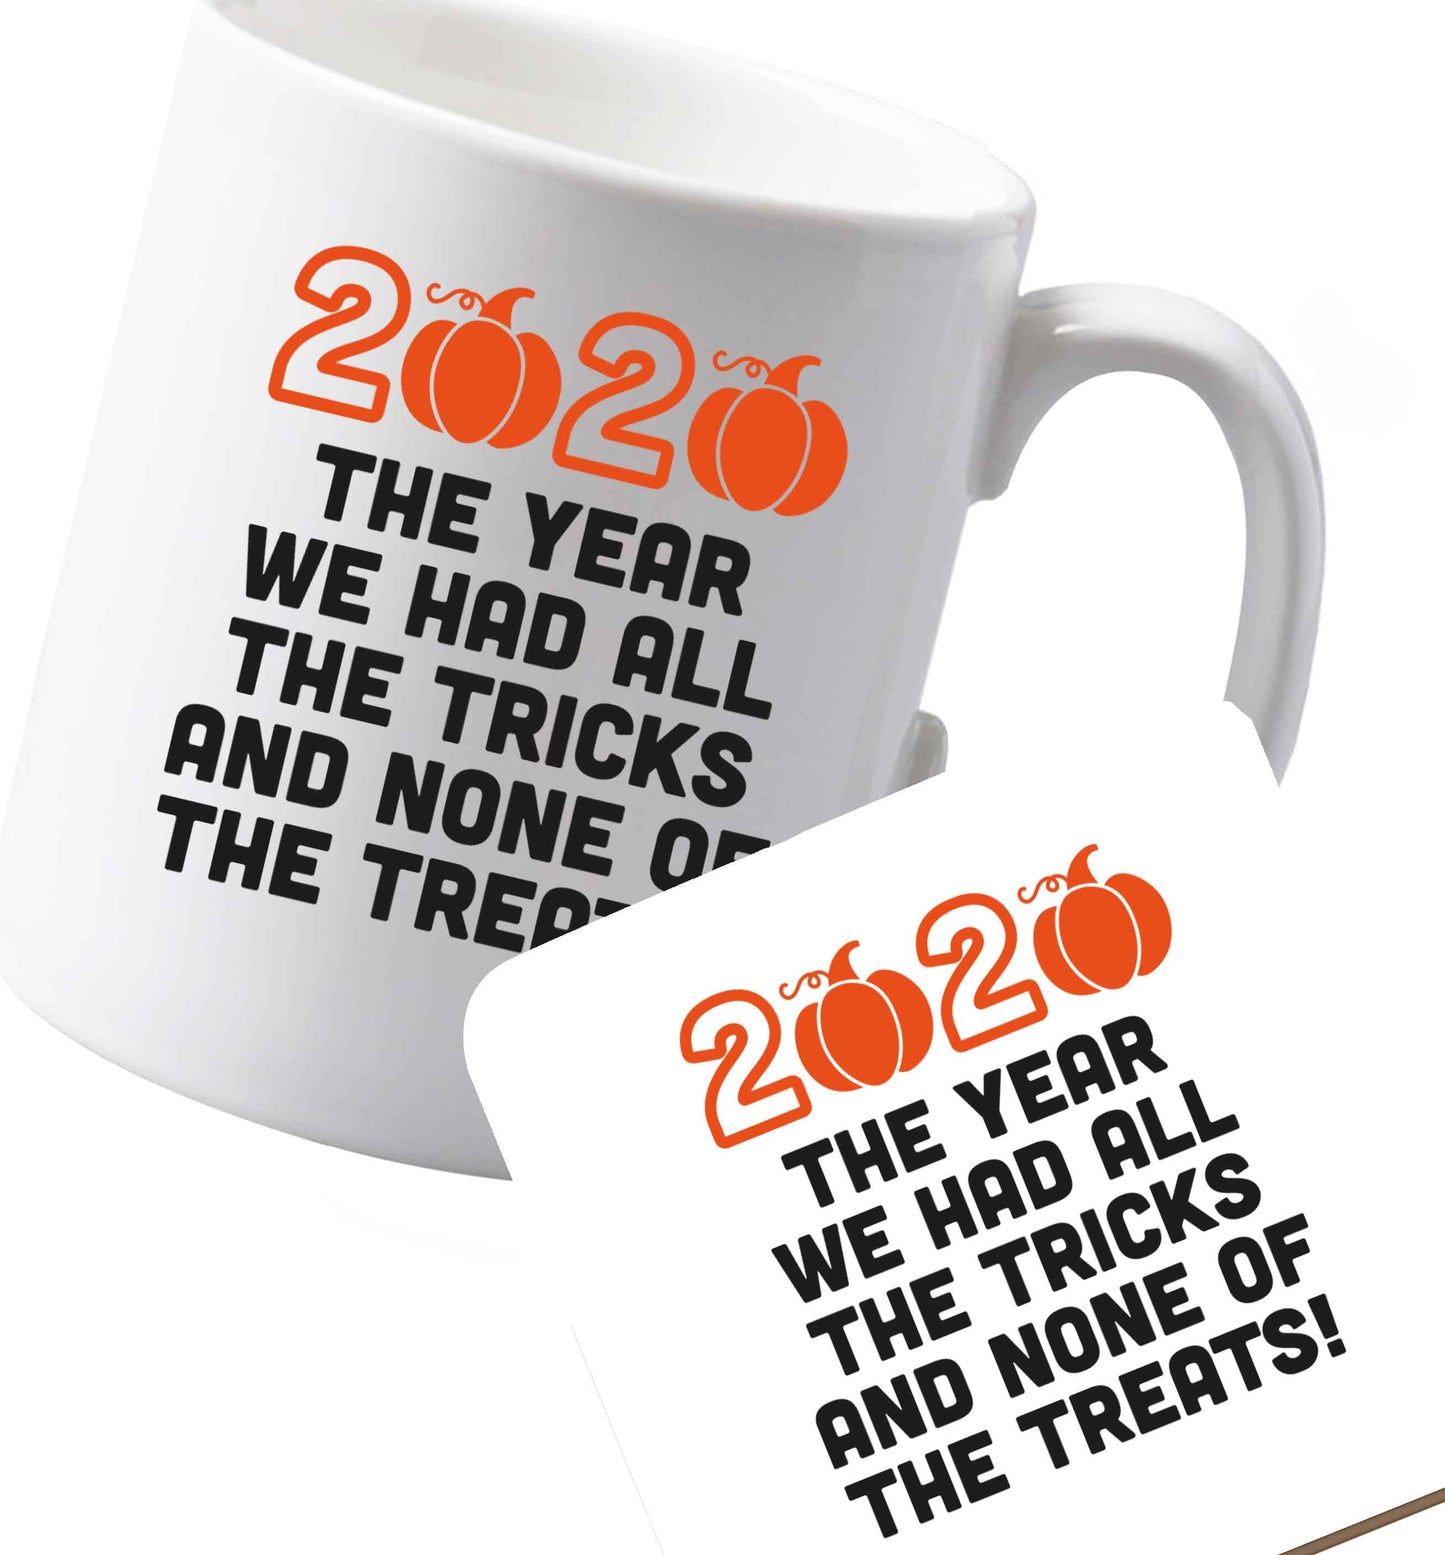 10 oz Ceramic mug and coaster 2020 The year we had all of the tricks and none of the treats both sides